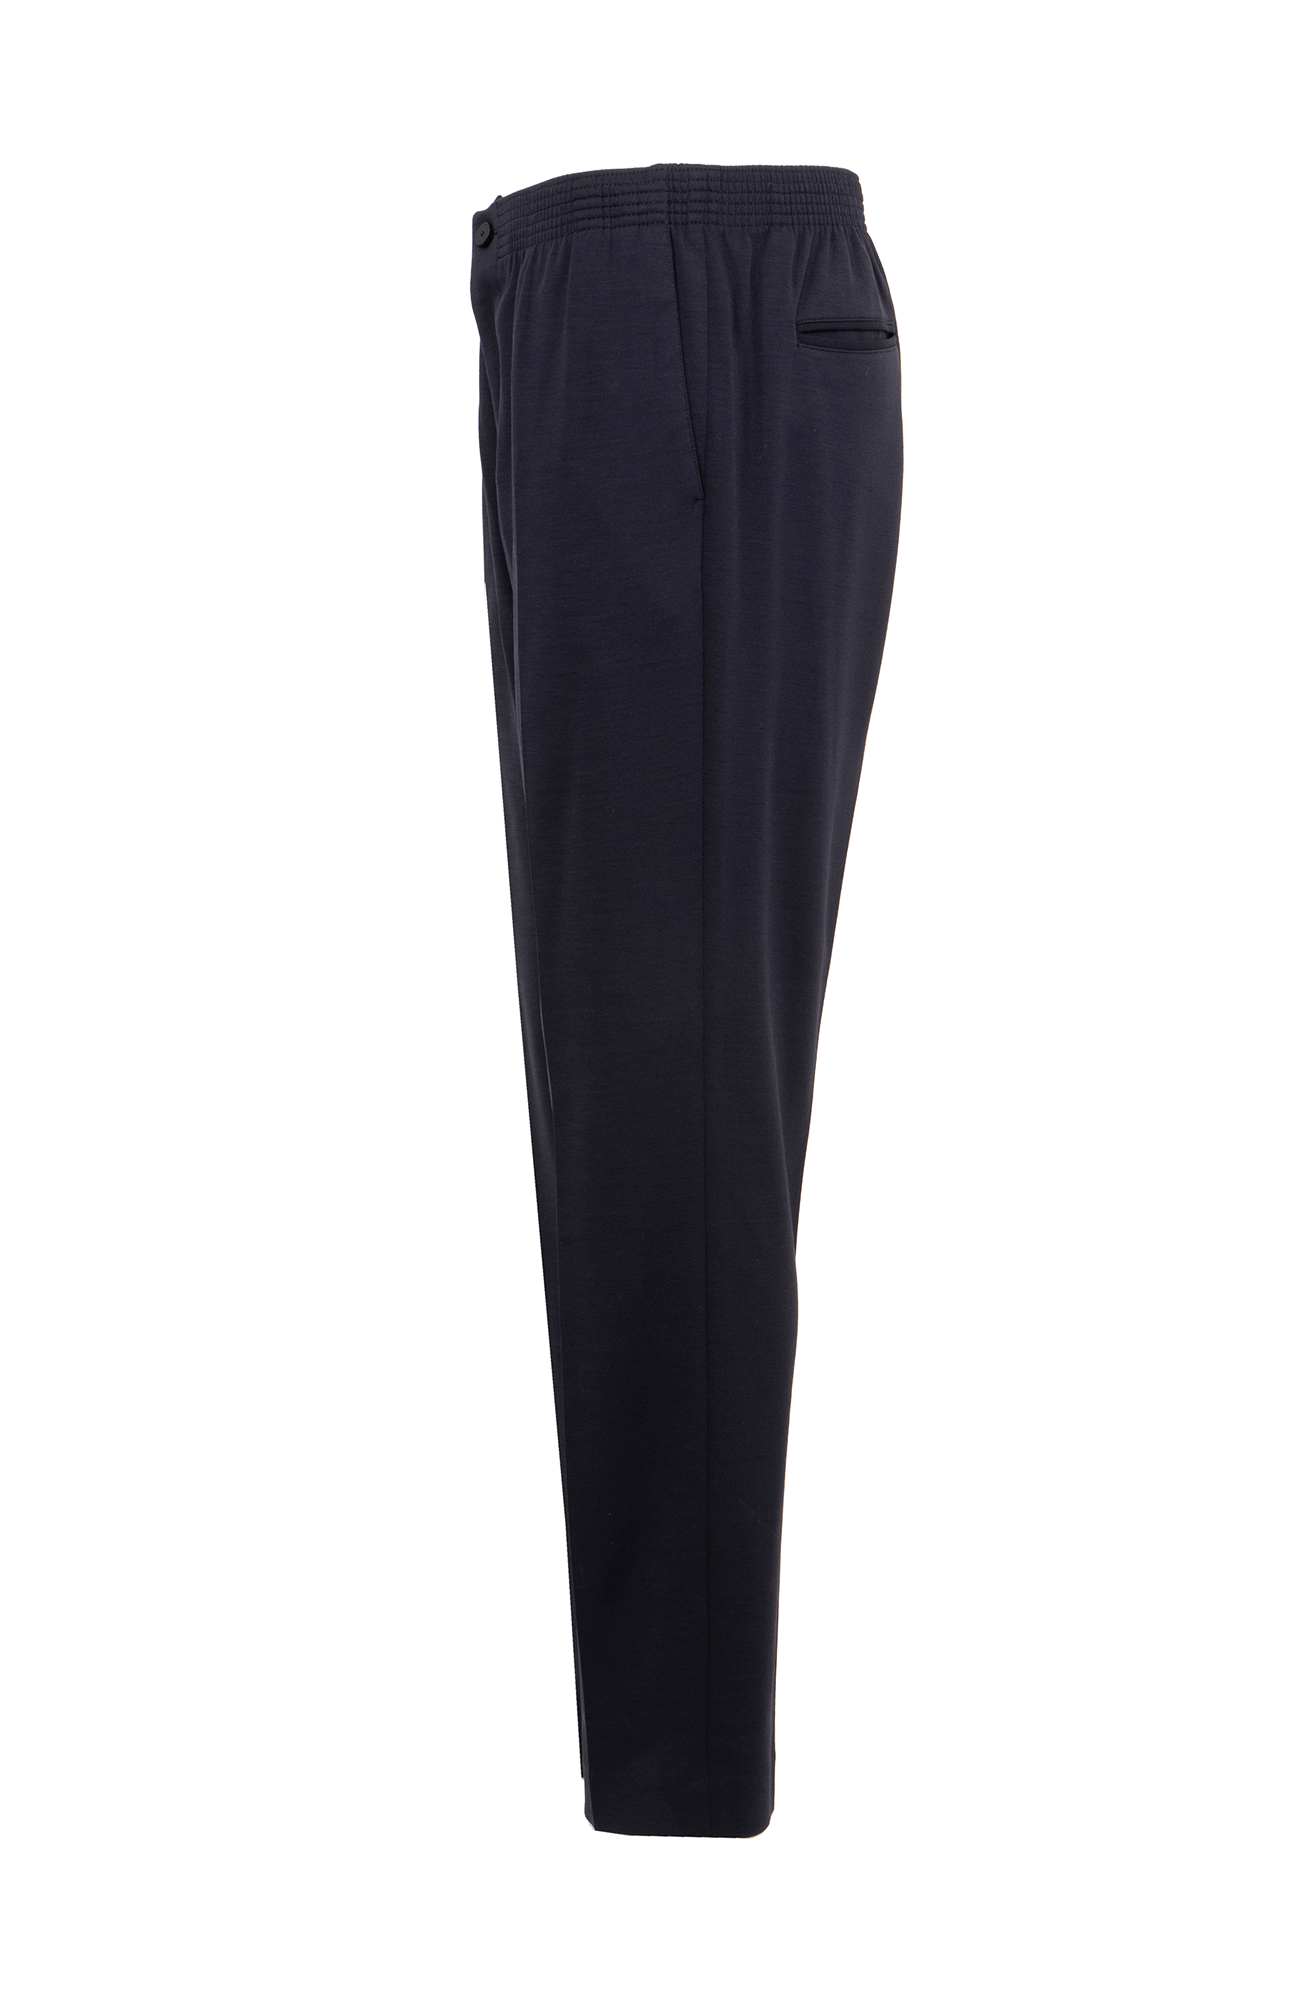 CIAK TAPERED pants with elastic waistband 